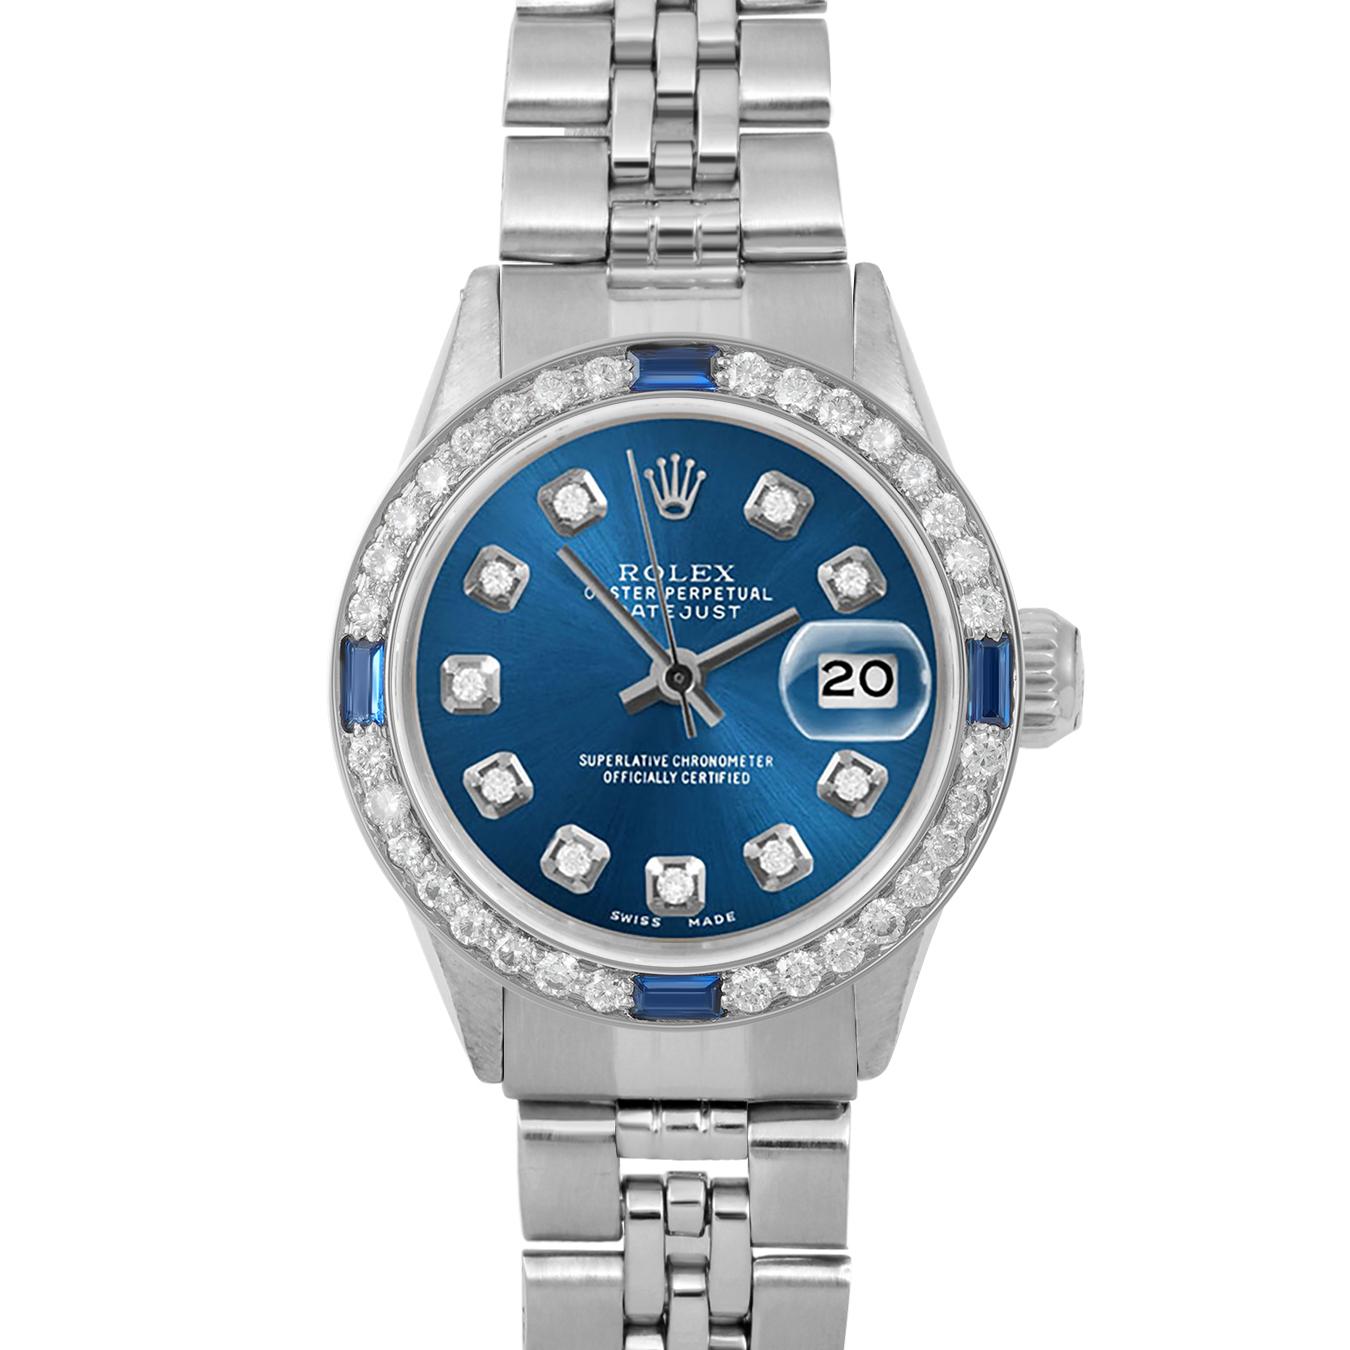 Brand : Rolex
Model : Datejust (Non-Quickset Model)
Gender : Ladies
Metals : Stainless Steel
Case Size : 24 mm
Dial : Custom Blue Diamond Dial (This dial is not original Rolex And has been added aftermarket yet is a beautiful Custom addition)
Bezel